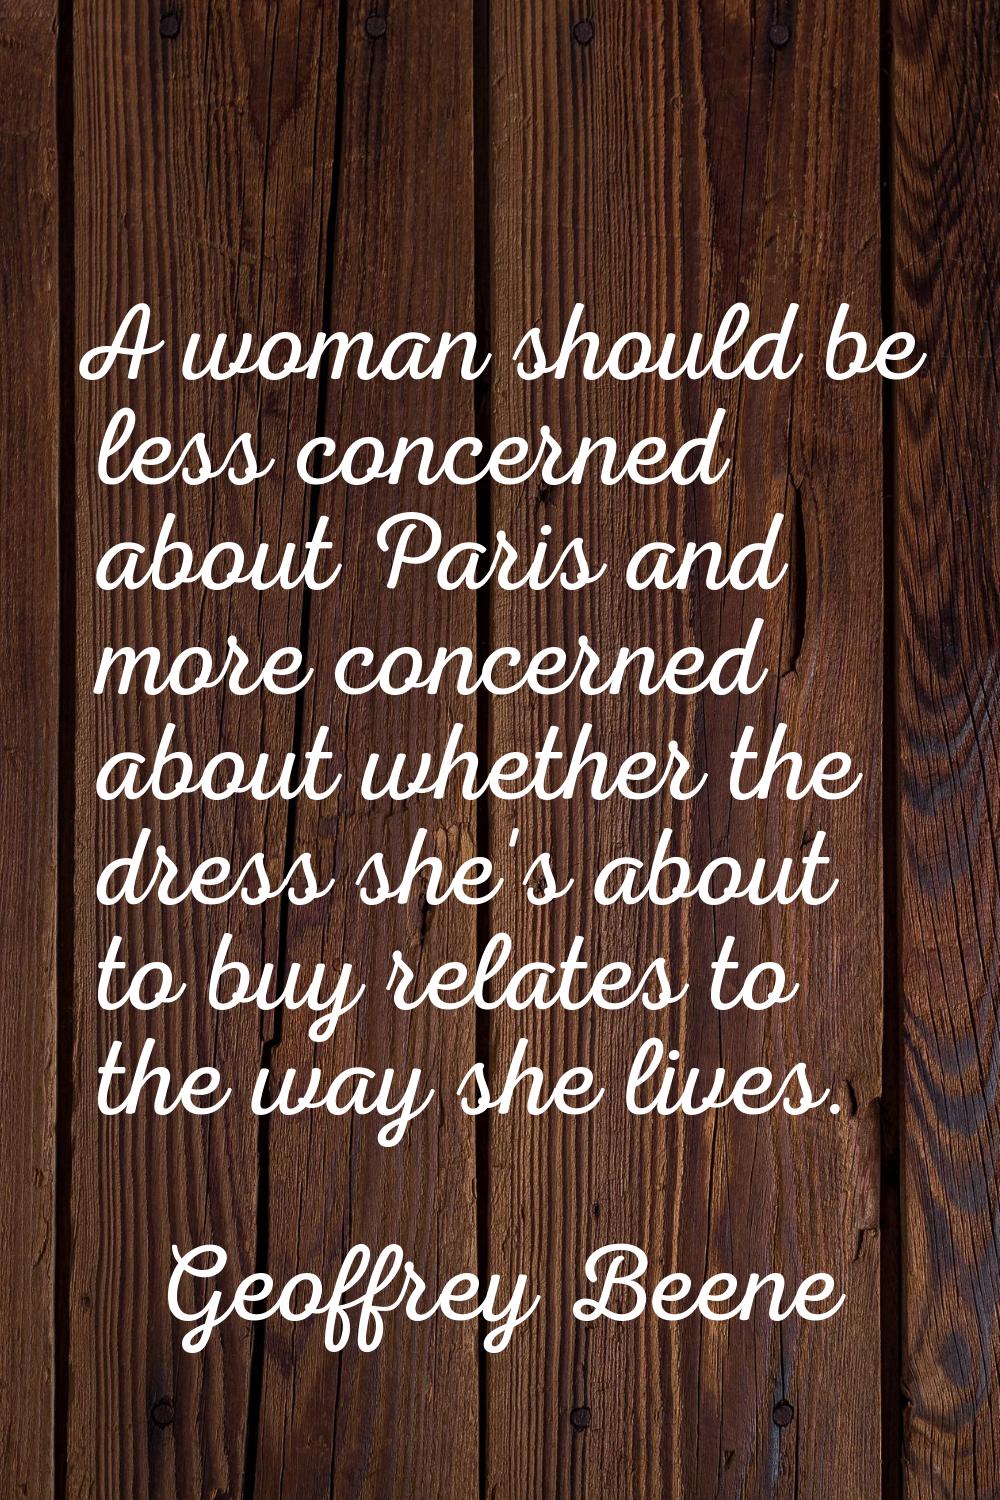 A woman should be less concerned about Paris and more concerned about whether the dress she's about